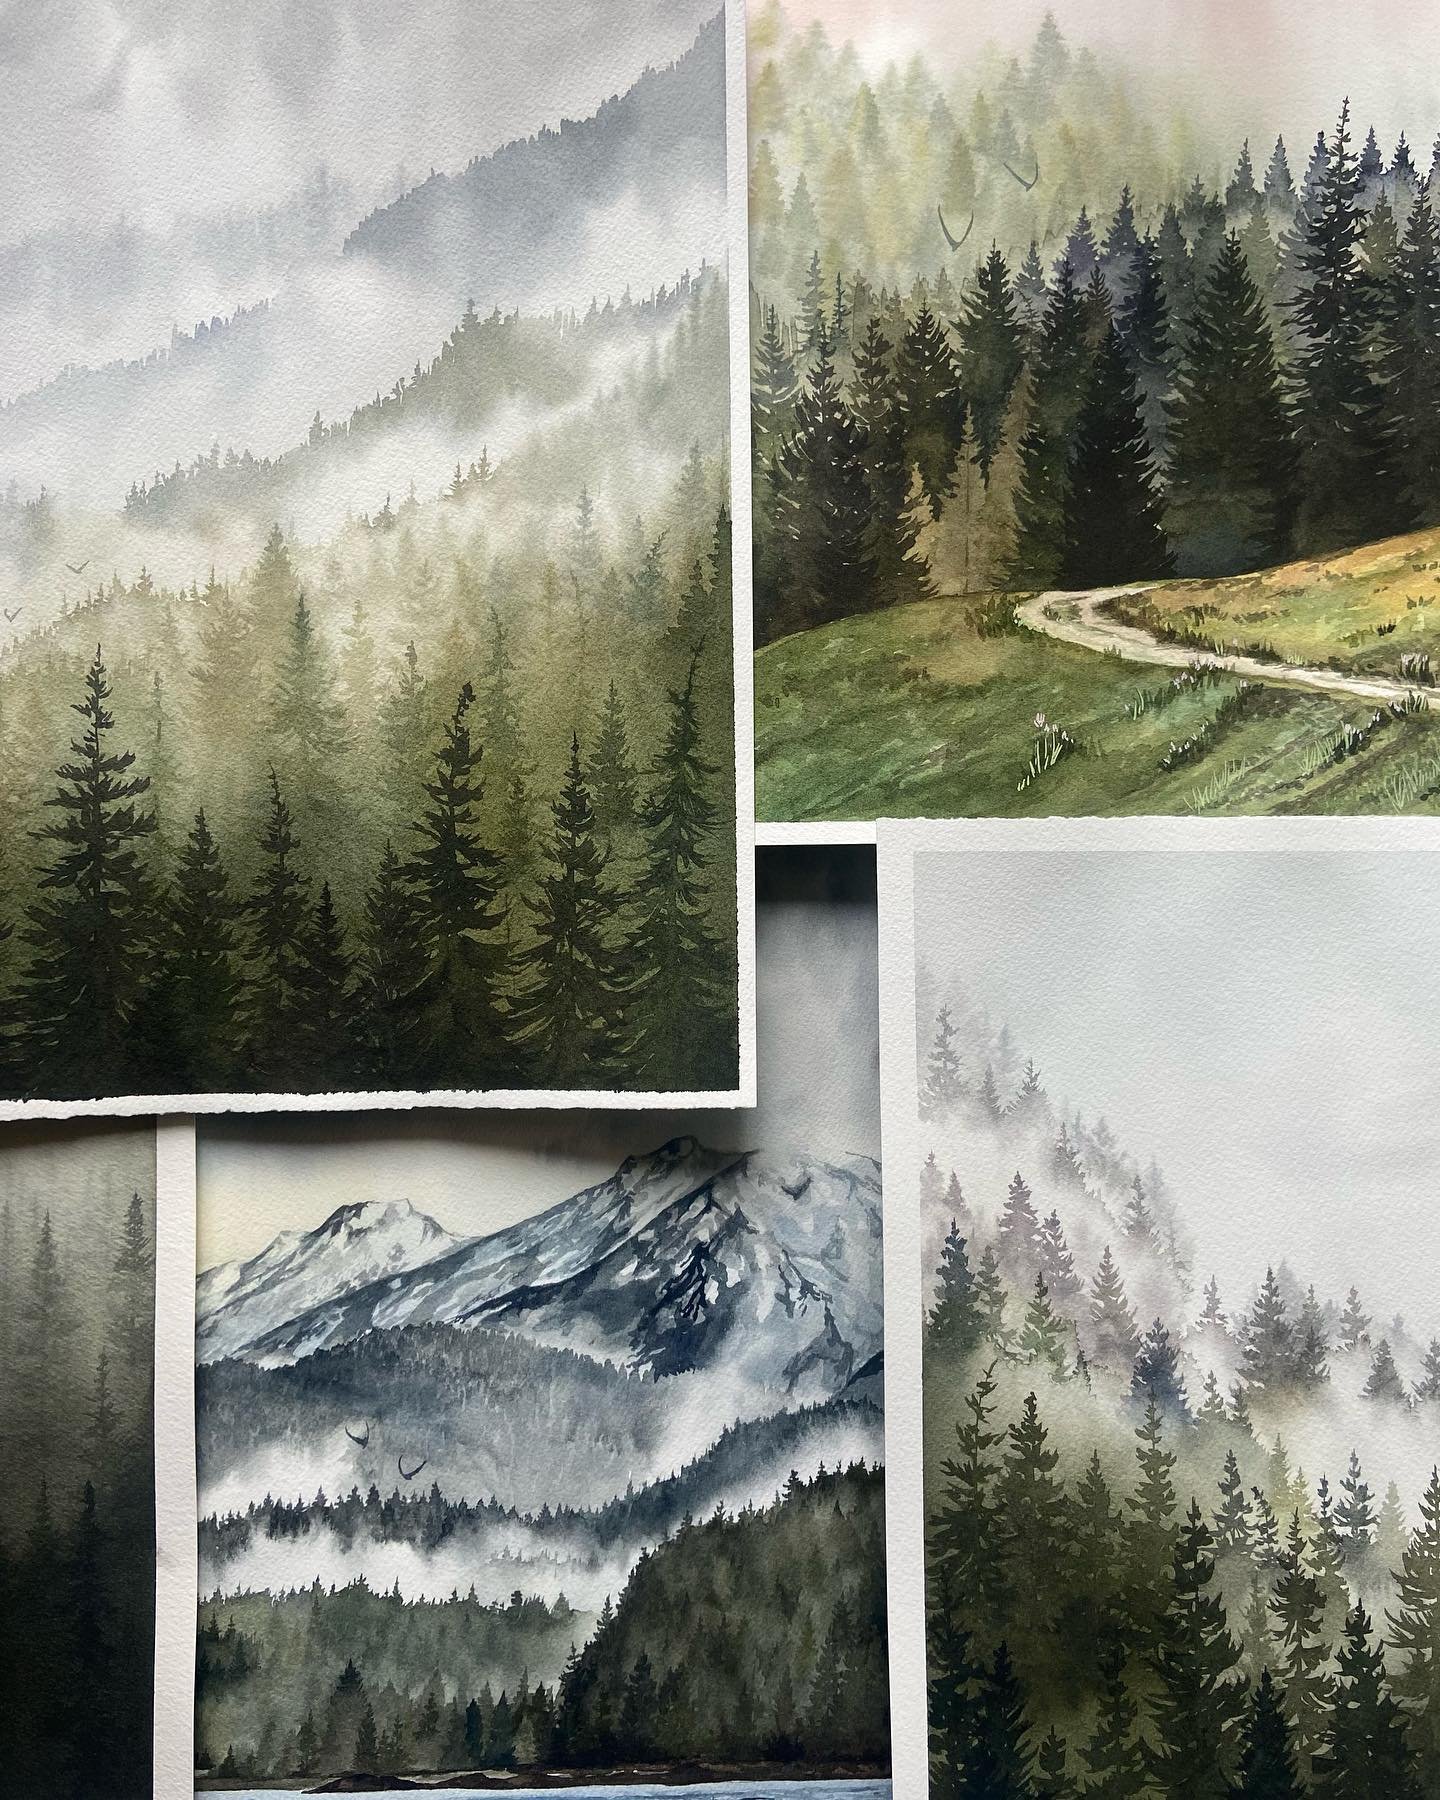 It's getting critical!

My big art show is two weeks from Saturday, and I've been busy behind the scenes painting originals, prepping paintings for frames, ordering branded signs, keeping kids alive, and so much more. I've had moments where I feel me